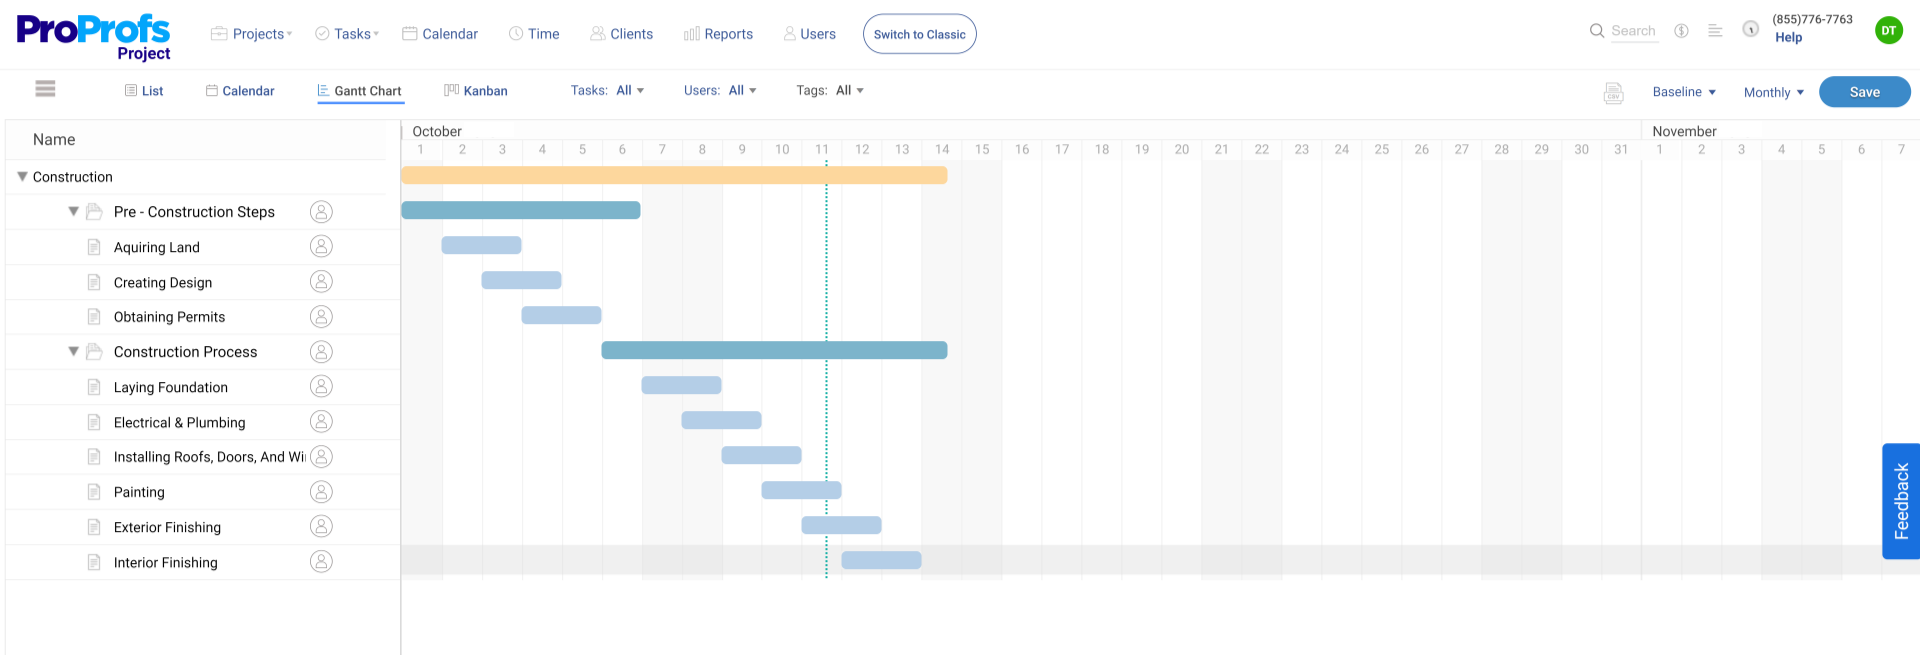 15 Best Project Management Charts to Visualize Project Operations